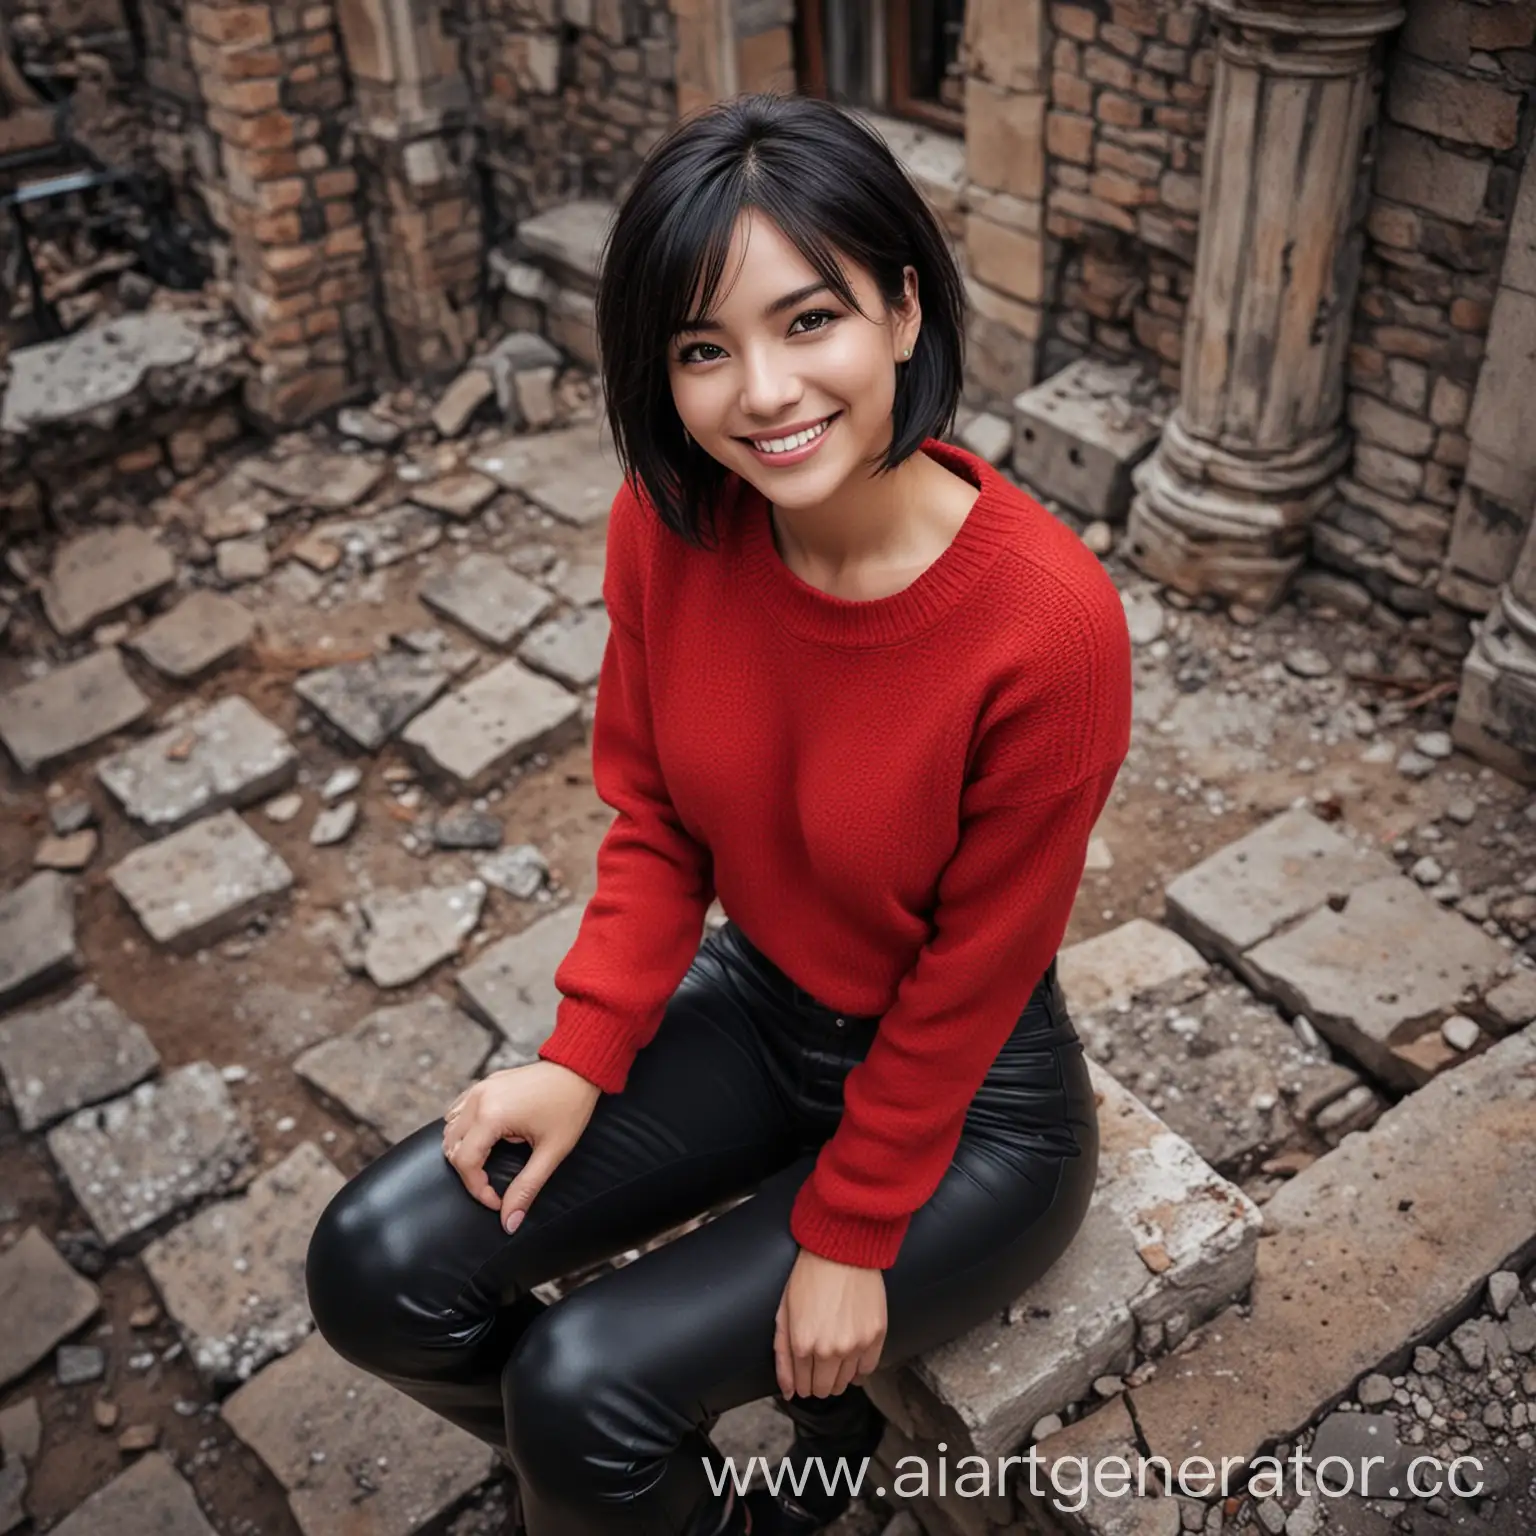 Ada-Sitting-in-Red-Sweater-Amidst-Night-Ruins